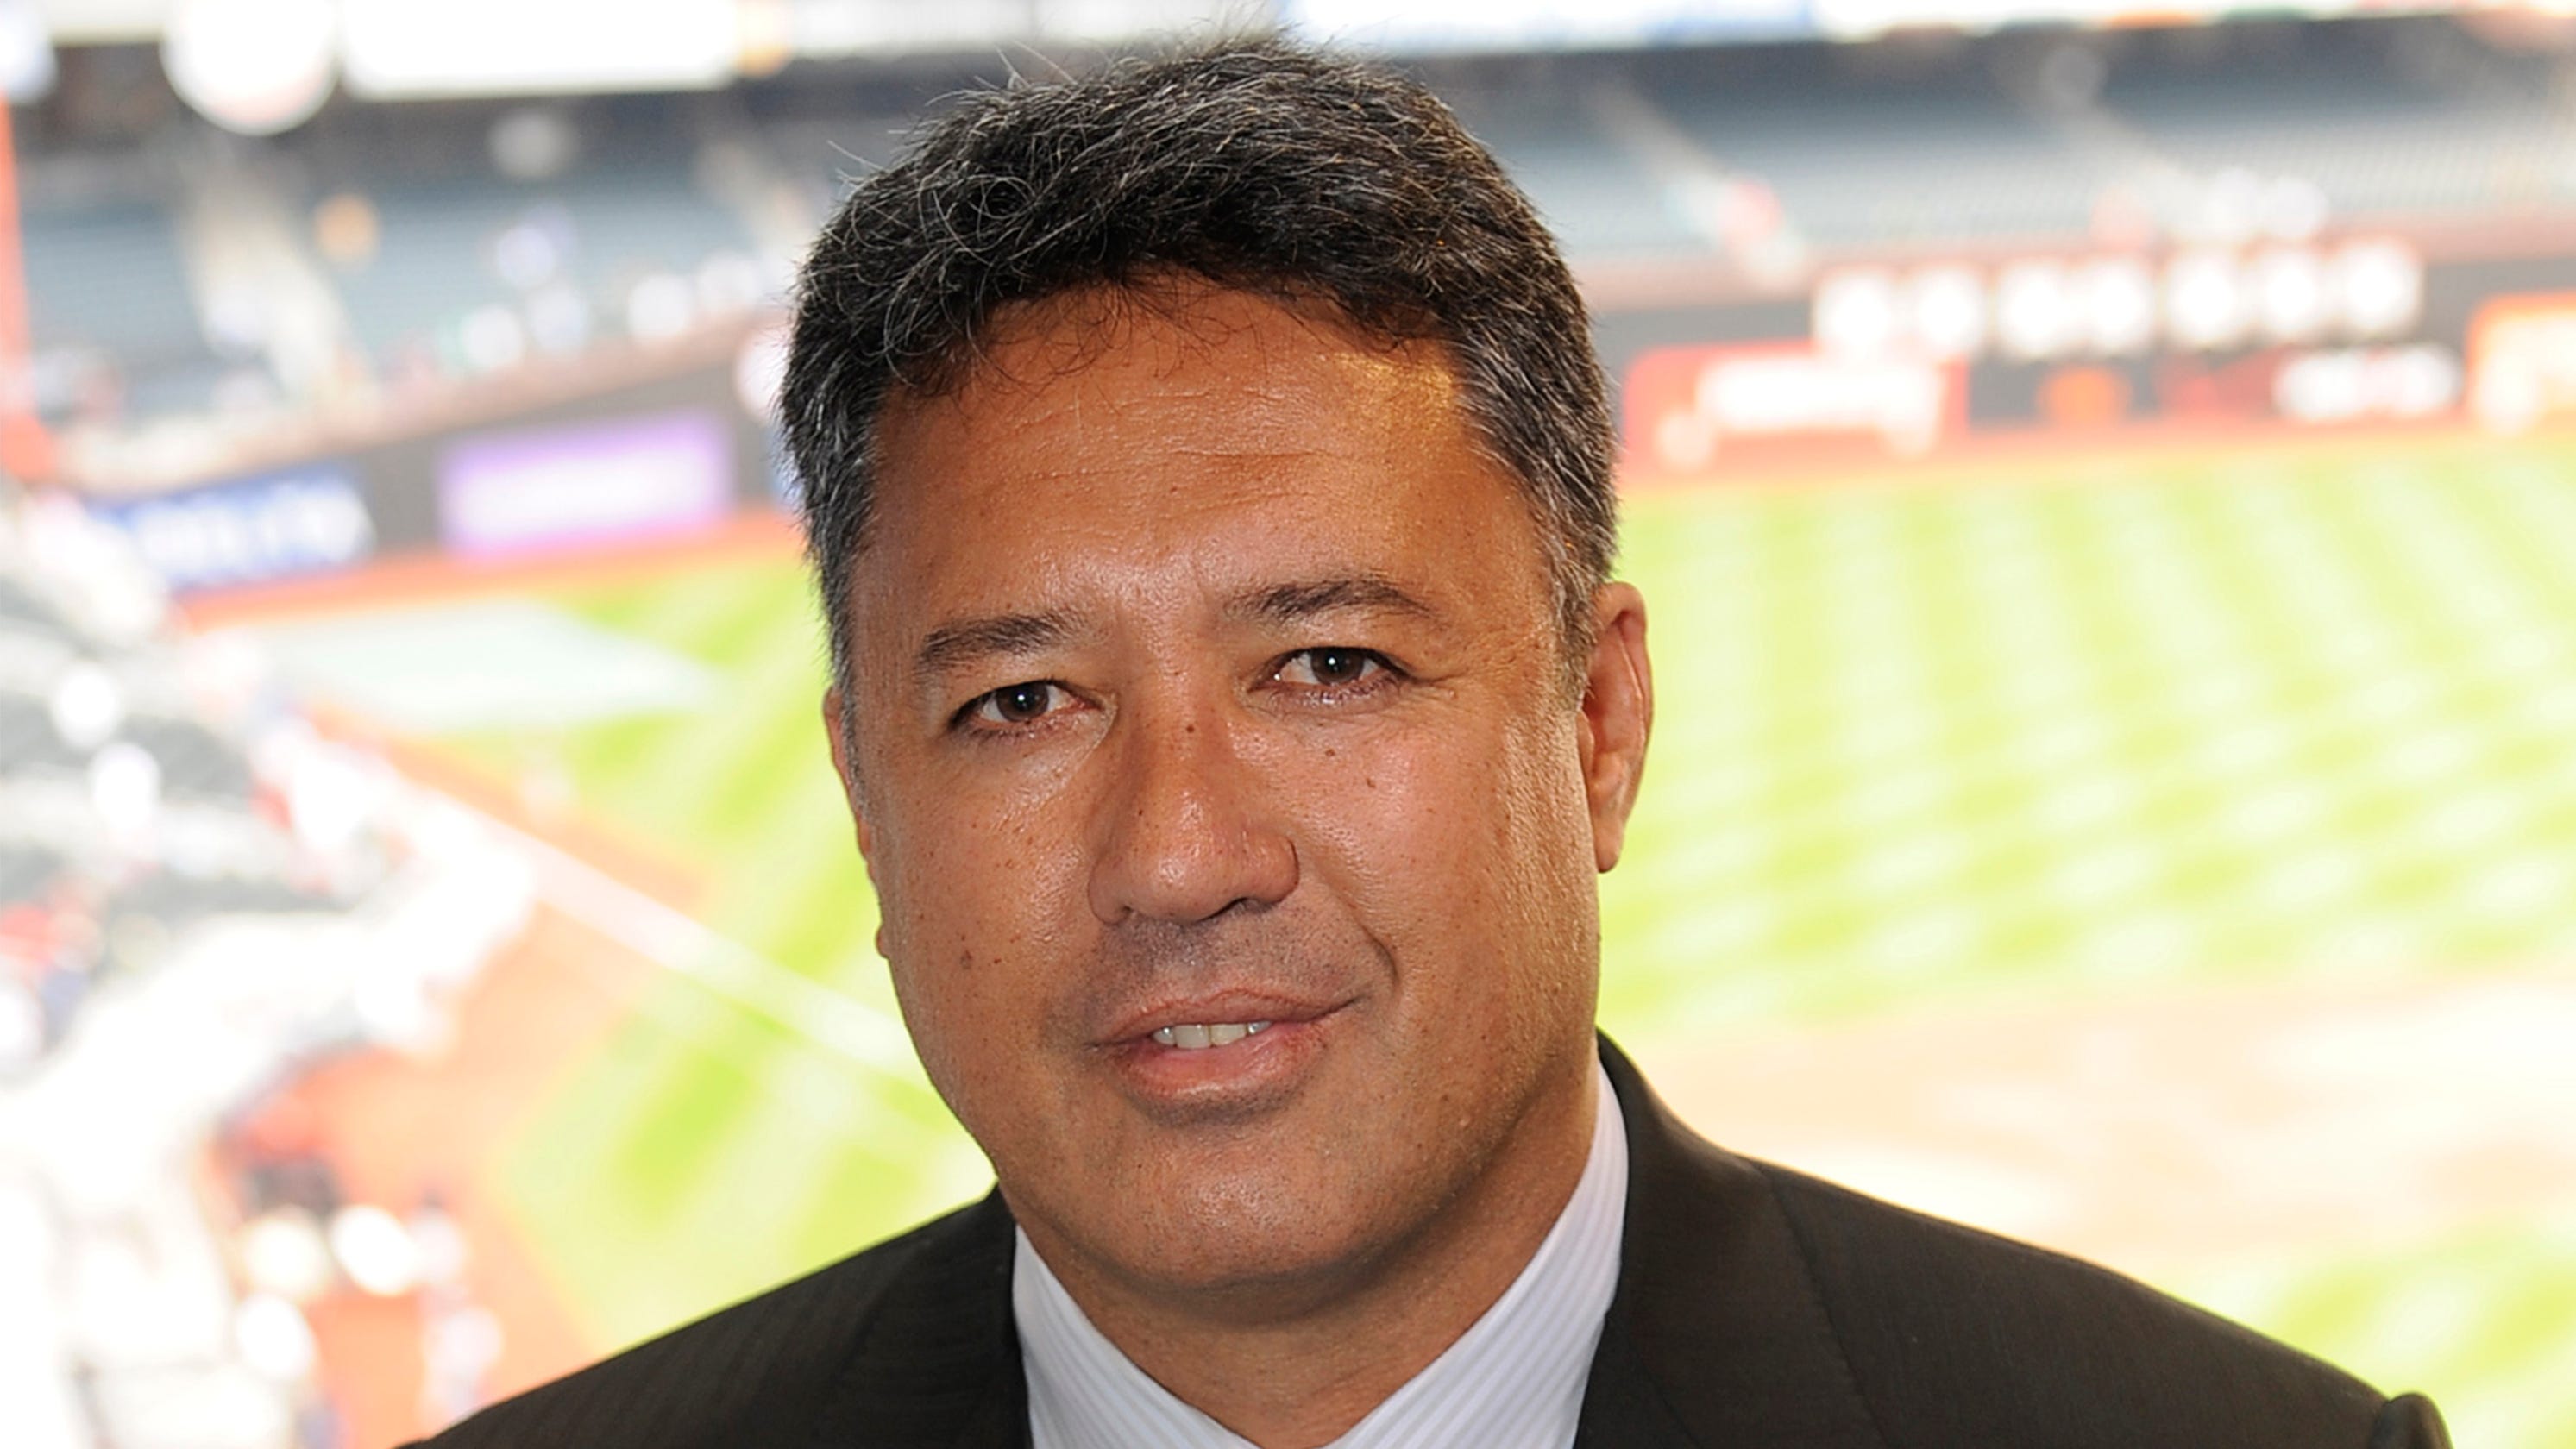 Ron Darling thyroid cancer stabilized; will return to SNY for Mets